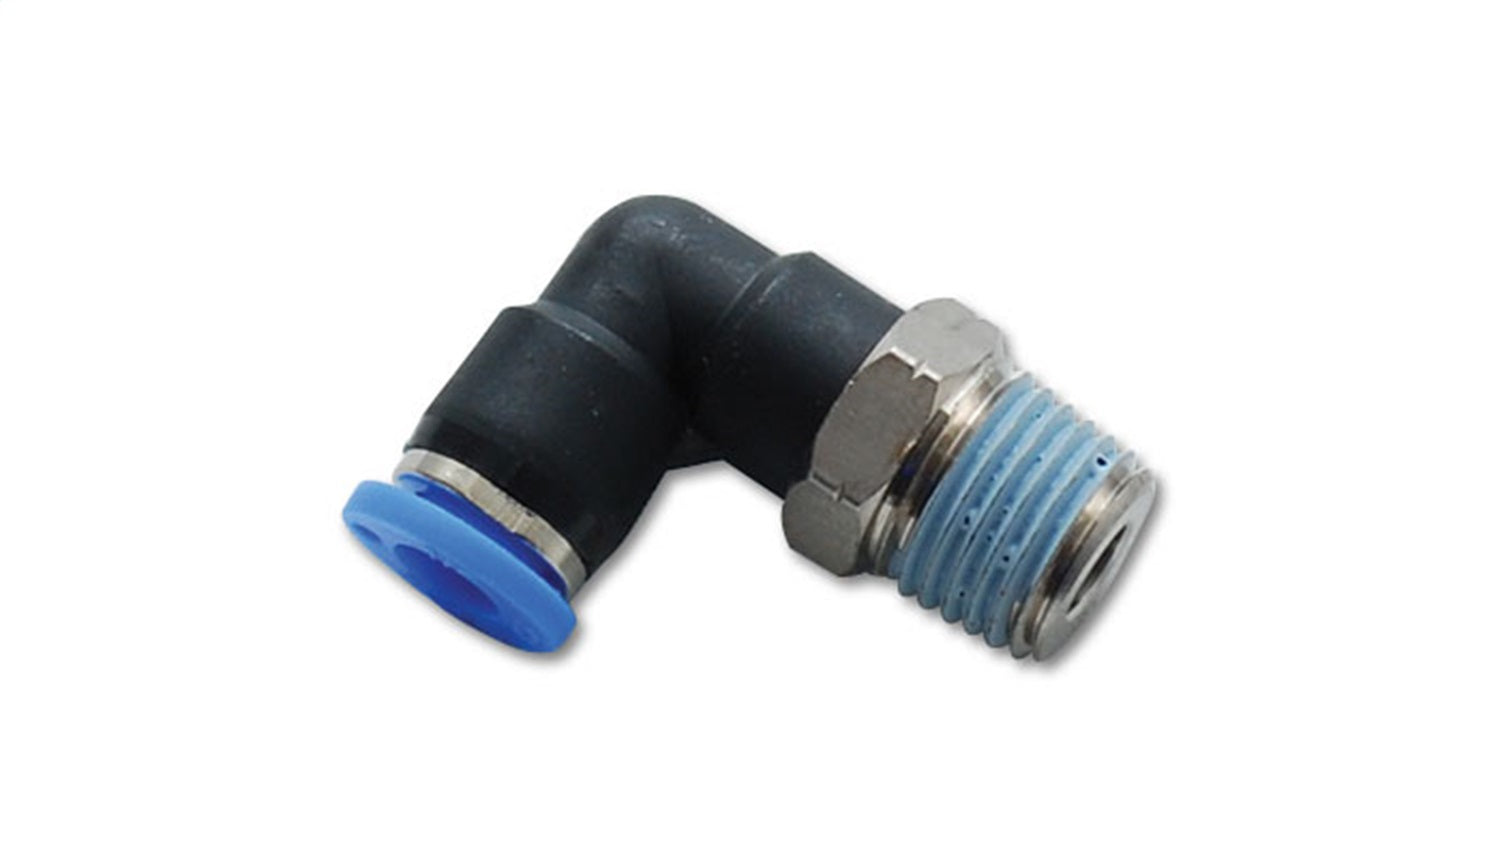 Vibrant Performance Male Elbow Fitting, for 3/8" O.D. Tubing (1/4" NPT Thread)